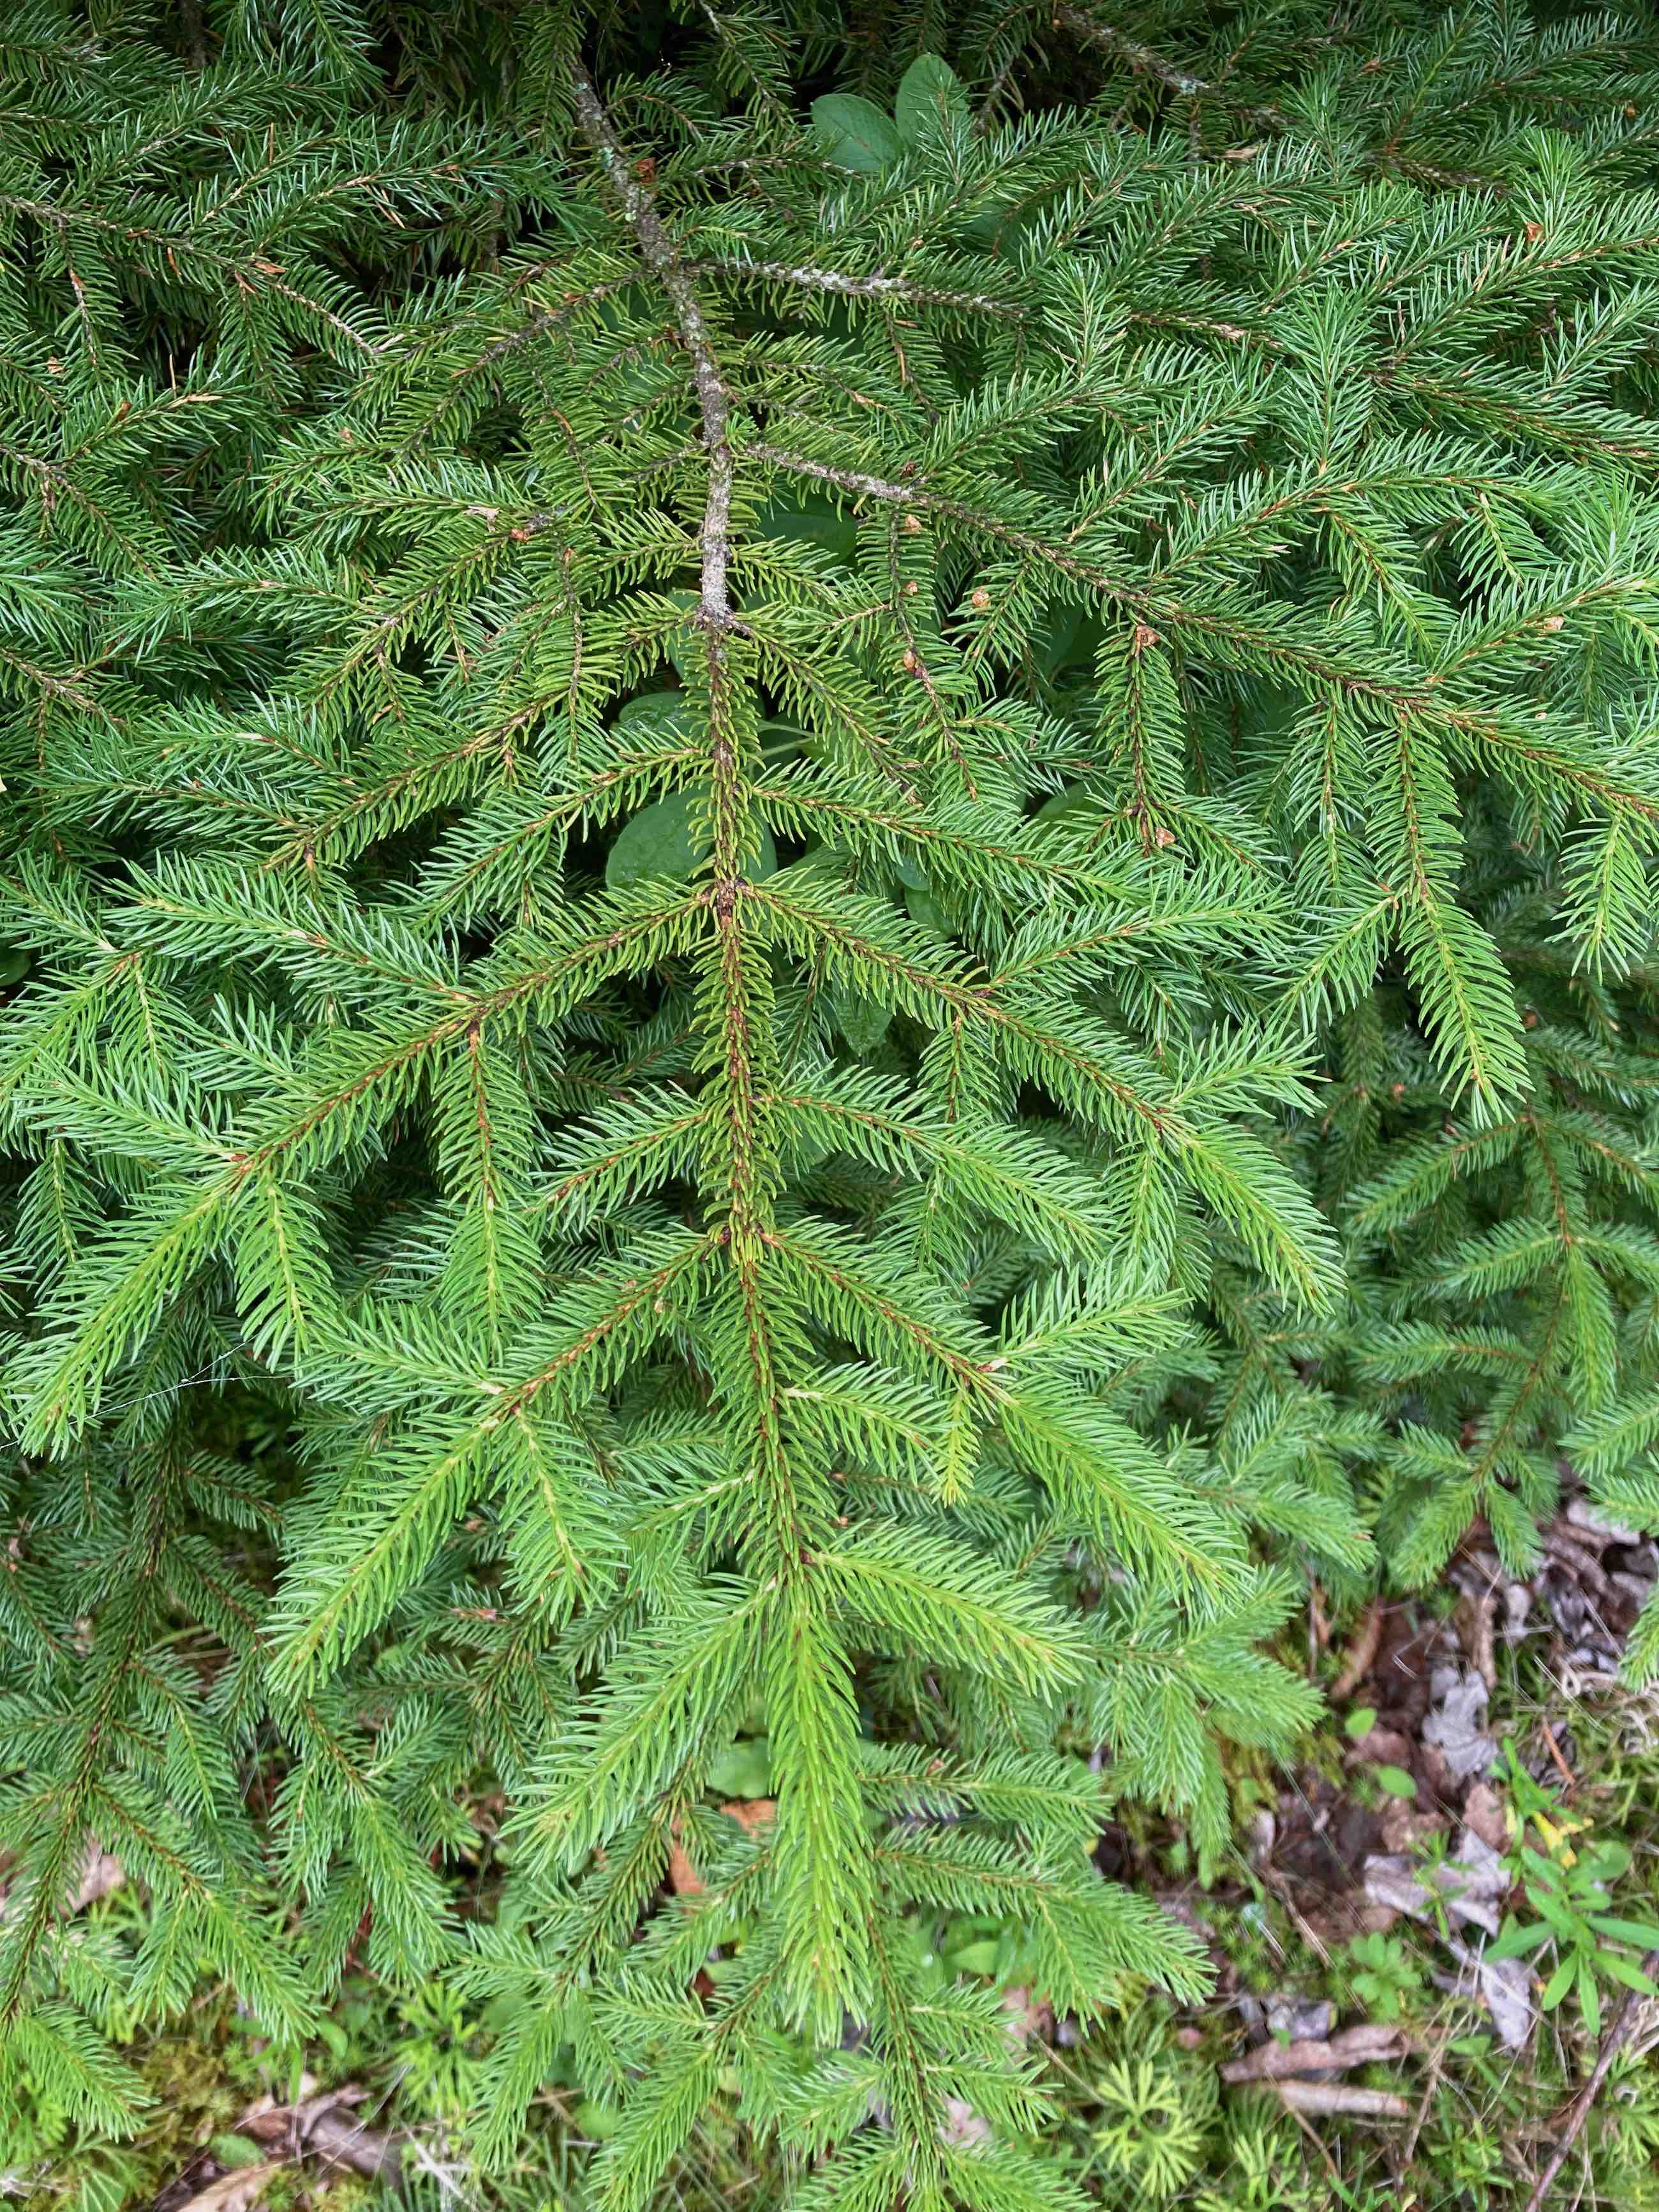 The Scientific Name is Picea rubens. You will likely hear them called Red Spruce, He Balsam. This picture shows the The sharp needles grow densely on all sides of the twigs. of Picea rubens